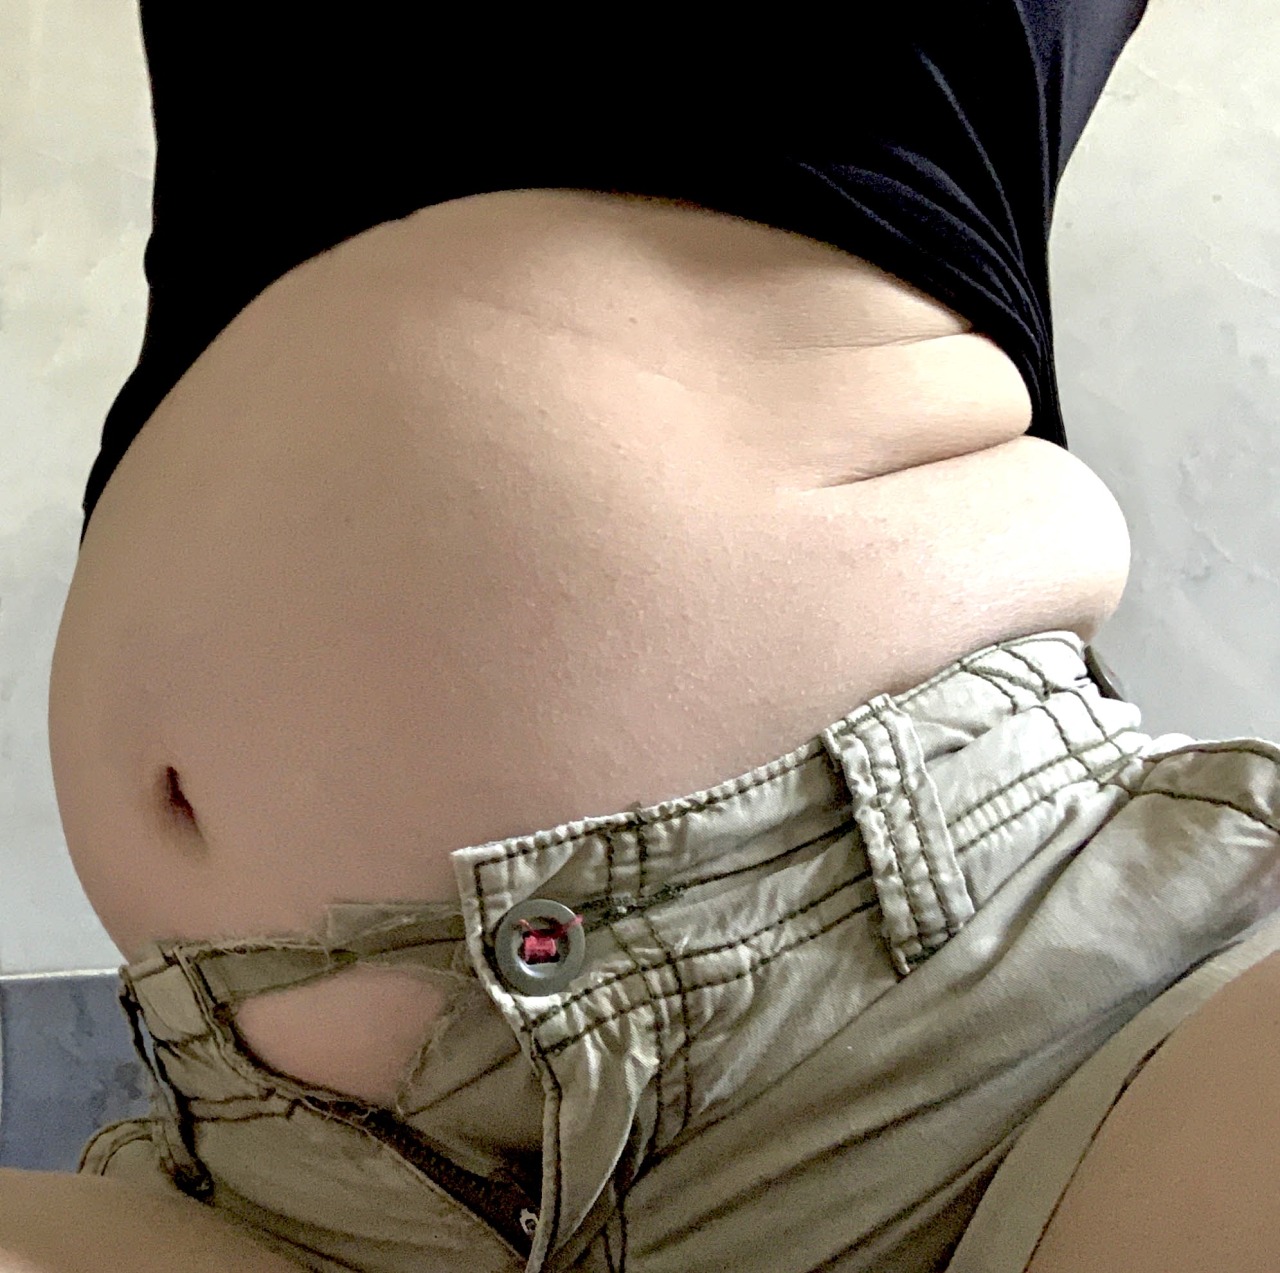 Porn stuffingbelly:I’m officially fat. I was photos